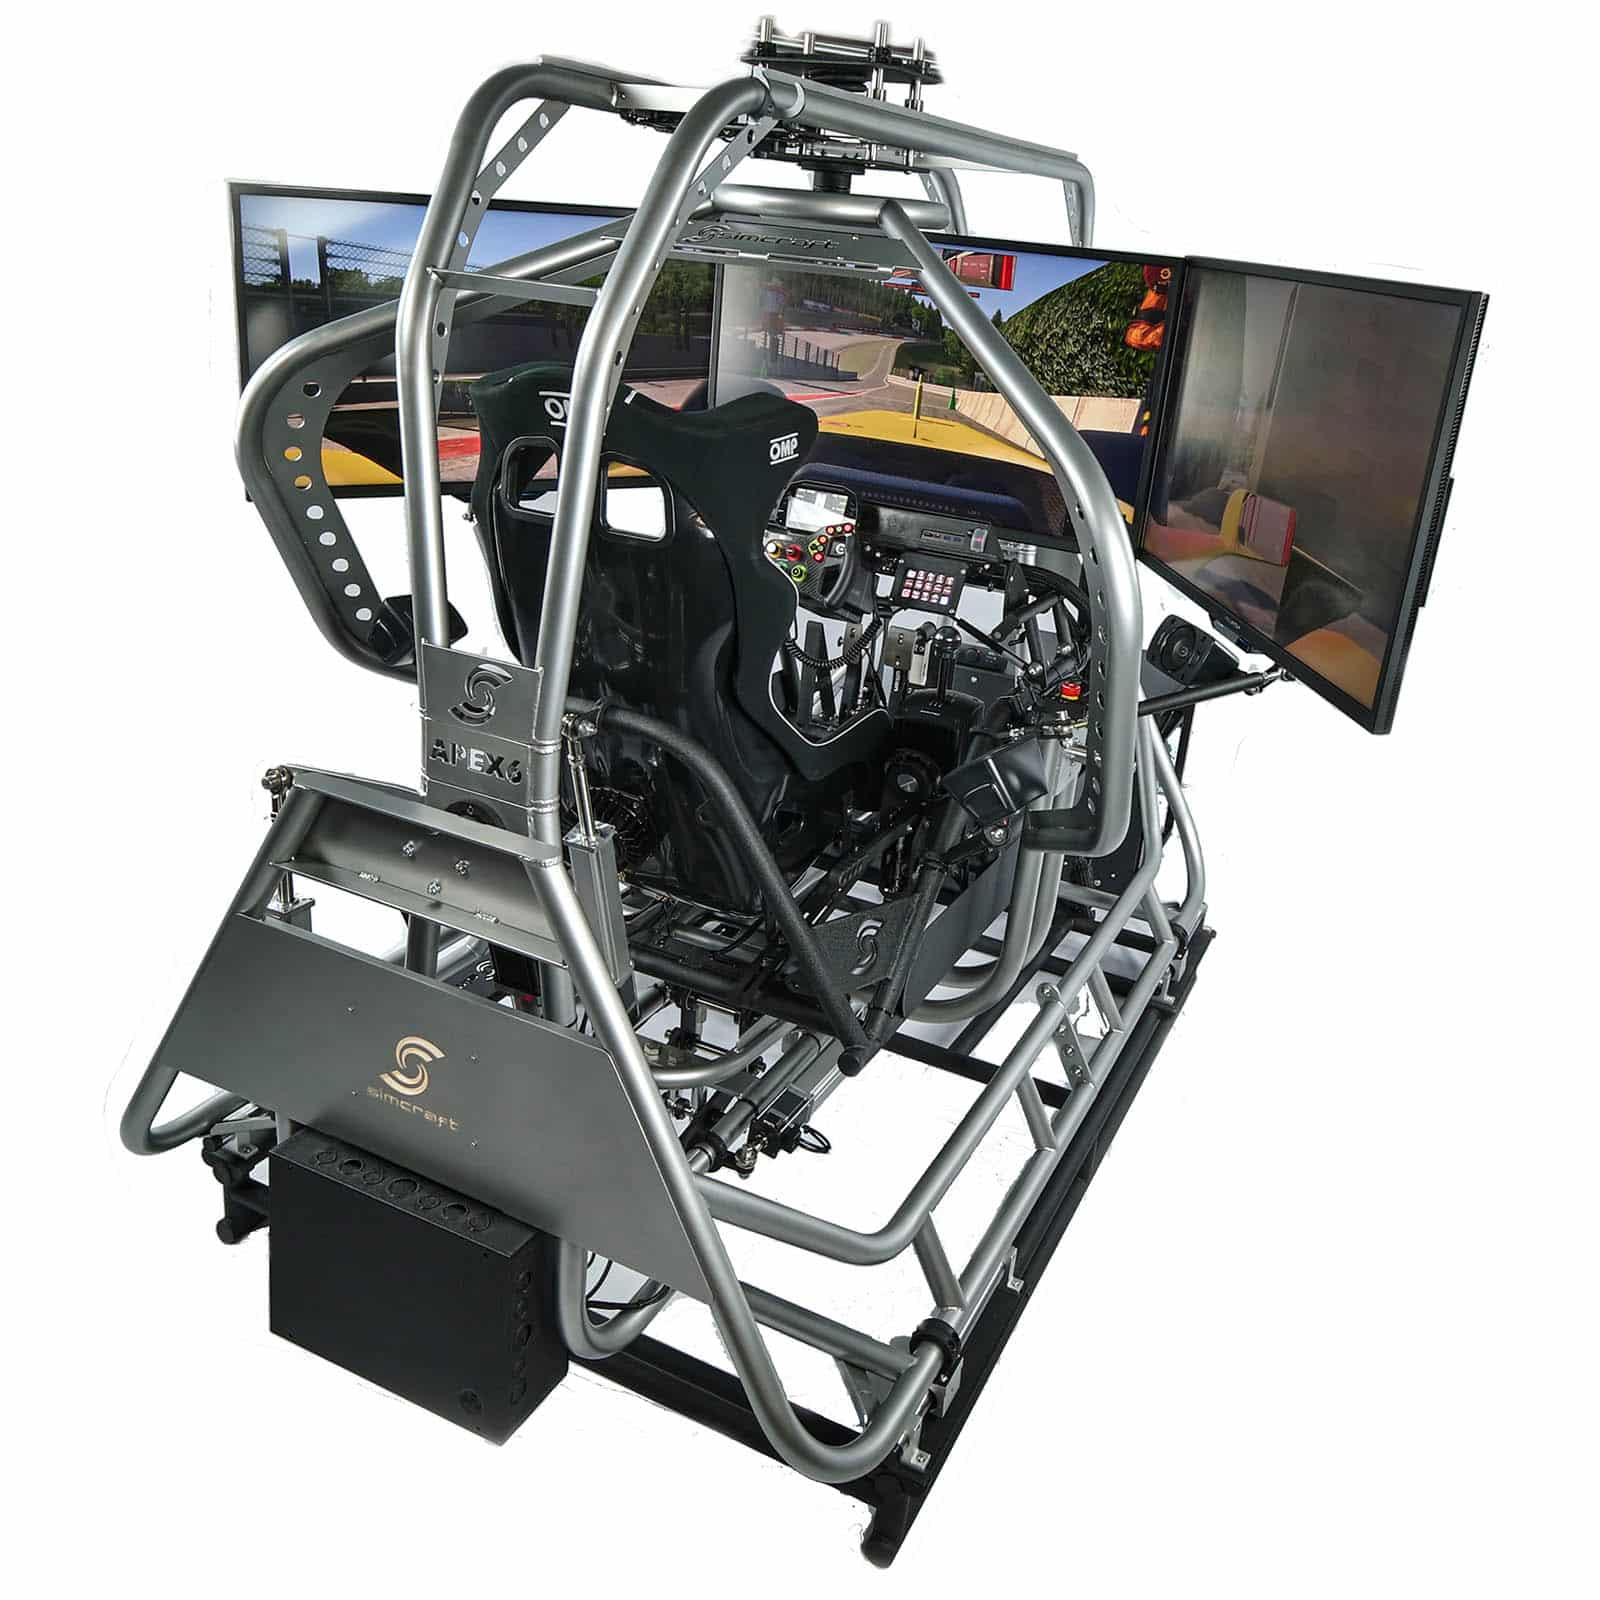 SimCraft is Official Simucube Reseller who creates sim racing motion simulators for simracers, and the racing simulator builds incorporate Simucube 2 Sport, Pro and Ultimate Direct Drive force feedback wheelbases to bring maximal realism in the racing and motion simulators.